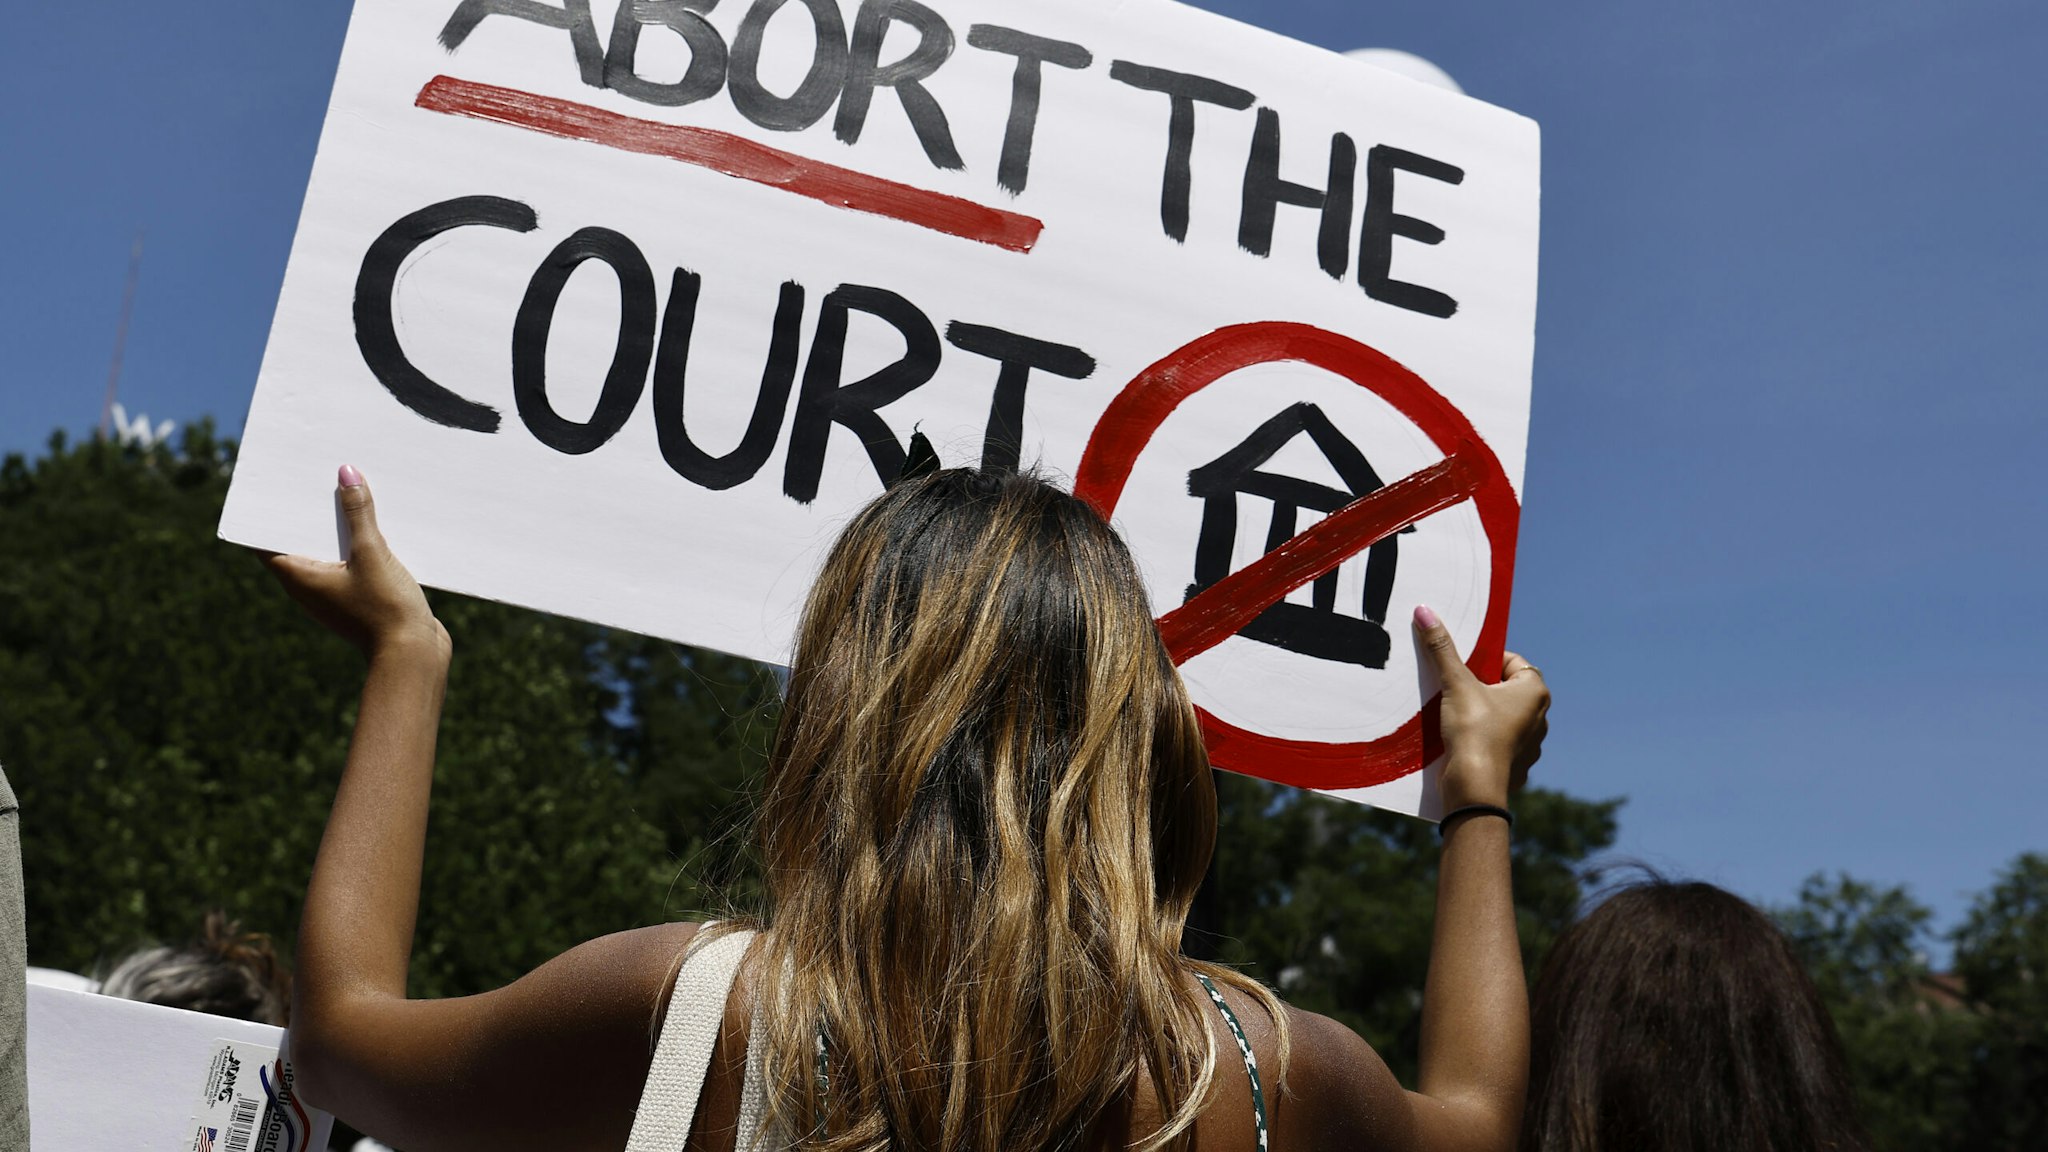 NEW YORK, NEW YORK - JULY 04: A woman holds up a sign in Union Square during a demonstration against the Supreme Court on July 4, 2022 in New York City. The Supreme Court's June 24th decision in the Dobbs v Jackson Women's Health case overturned the landmark 50-year-old Roe v Wade case, removing a federal right to an abortion. Many states enacted “Trigger Laws” immediately following the decision while others filed suits to retain their right to continue performing abortions. The ruling imposed legal restrictions following the first trimester of the pregnancy and clearing the way for states to set their own laws. (Photo by John Lamparski/Getty Images)